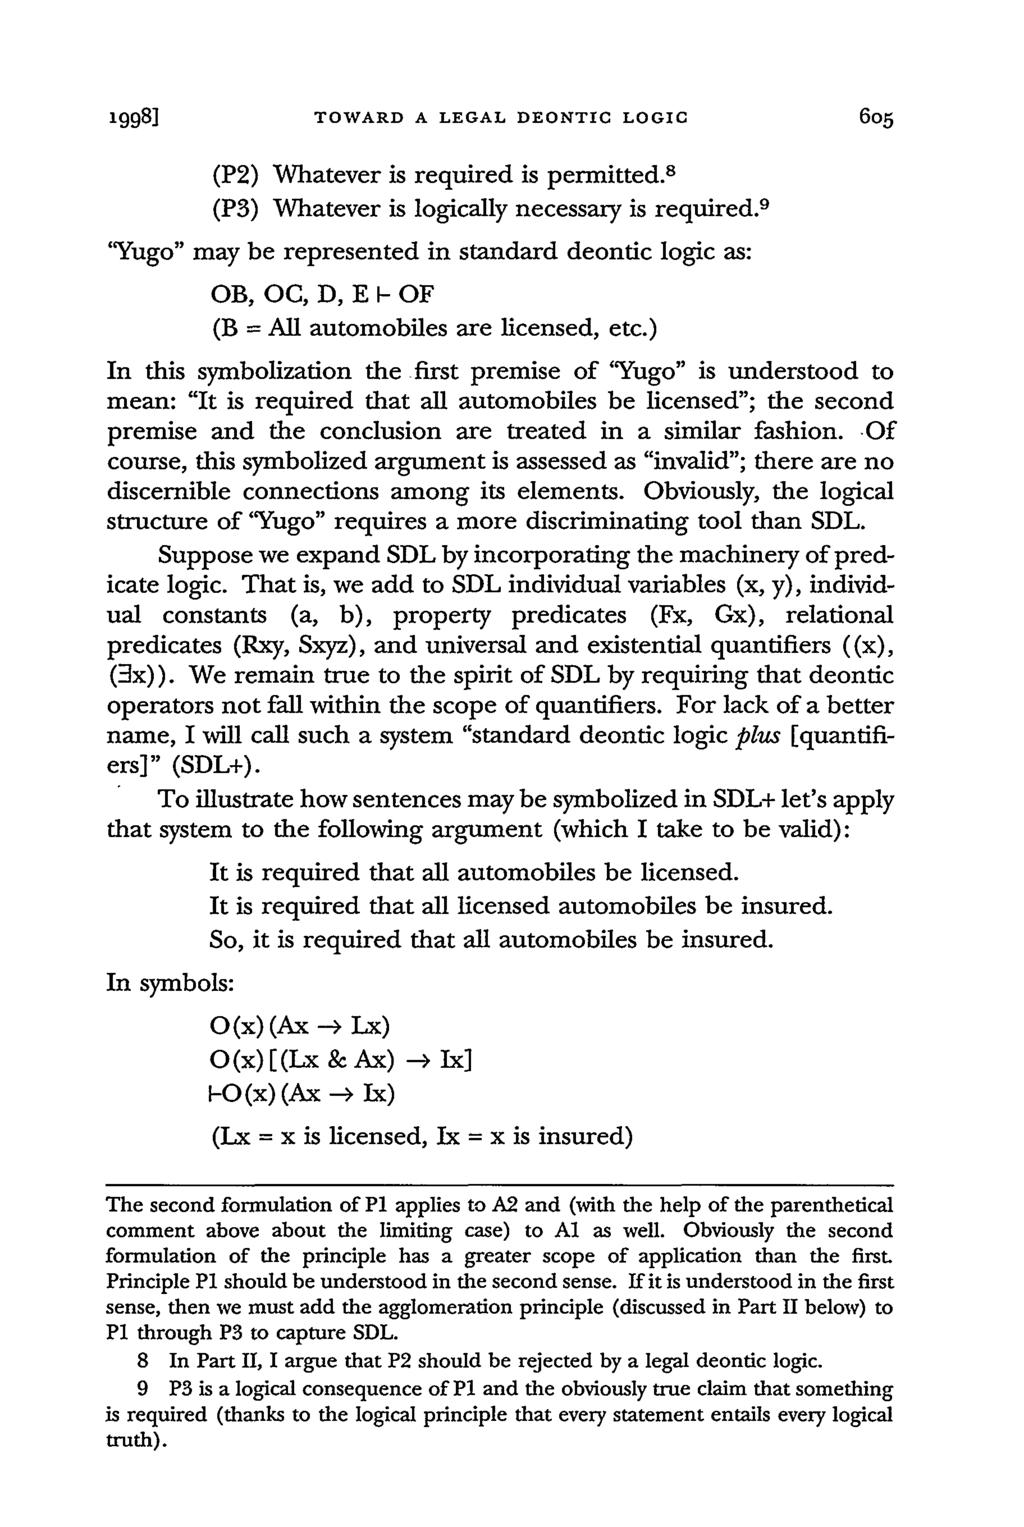 1998] TOWARD A LEGAL DEONTIC LOGIC (P2) Whatever is required is permitted. 8 (P3) Whatever is logically necessary is required.